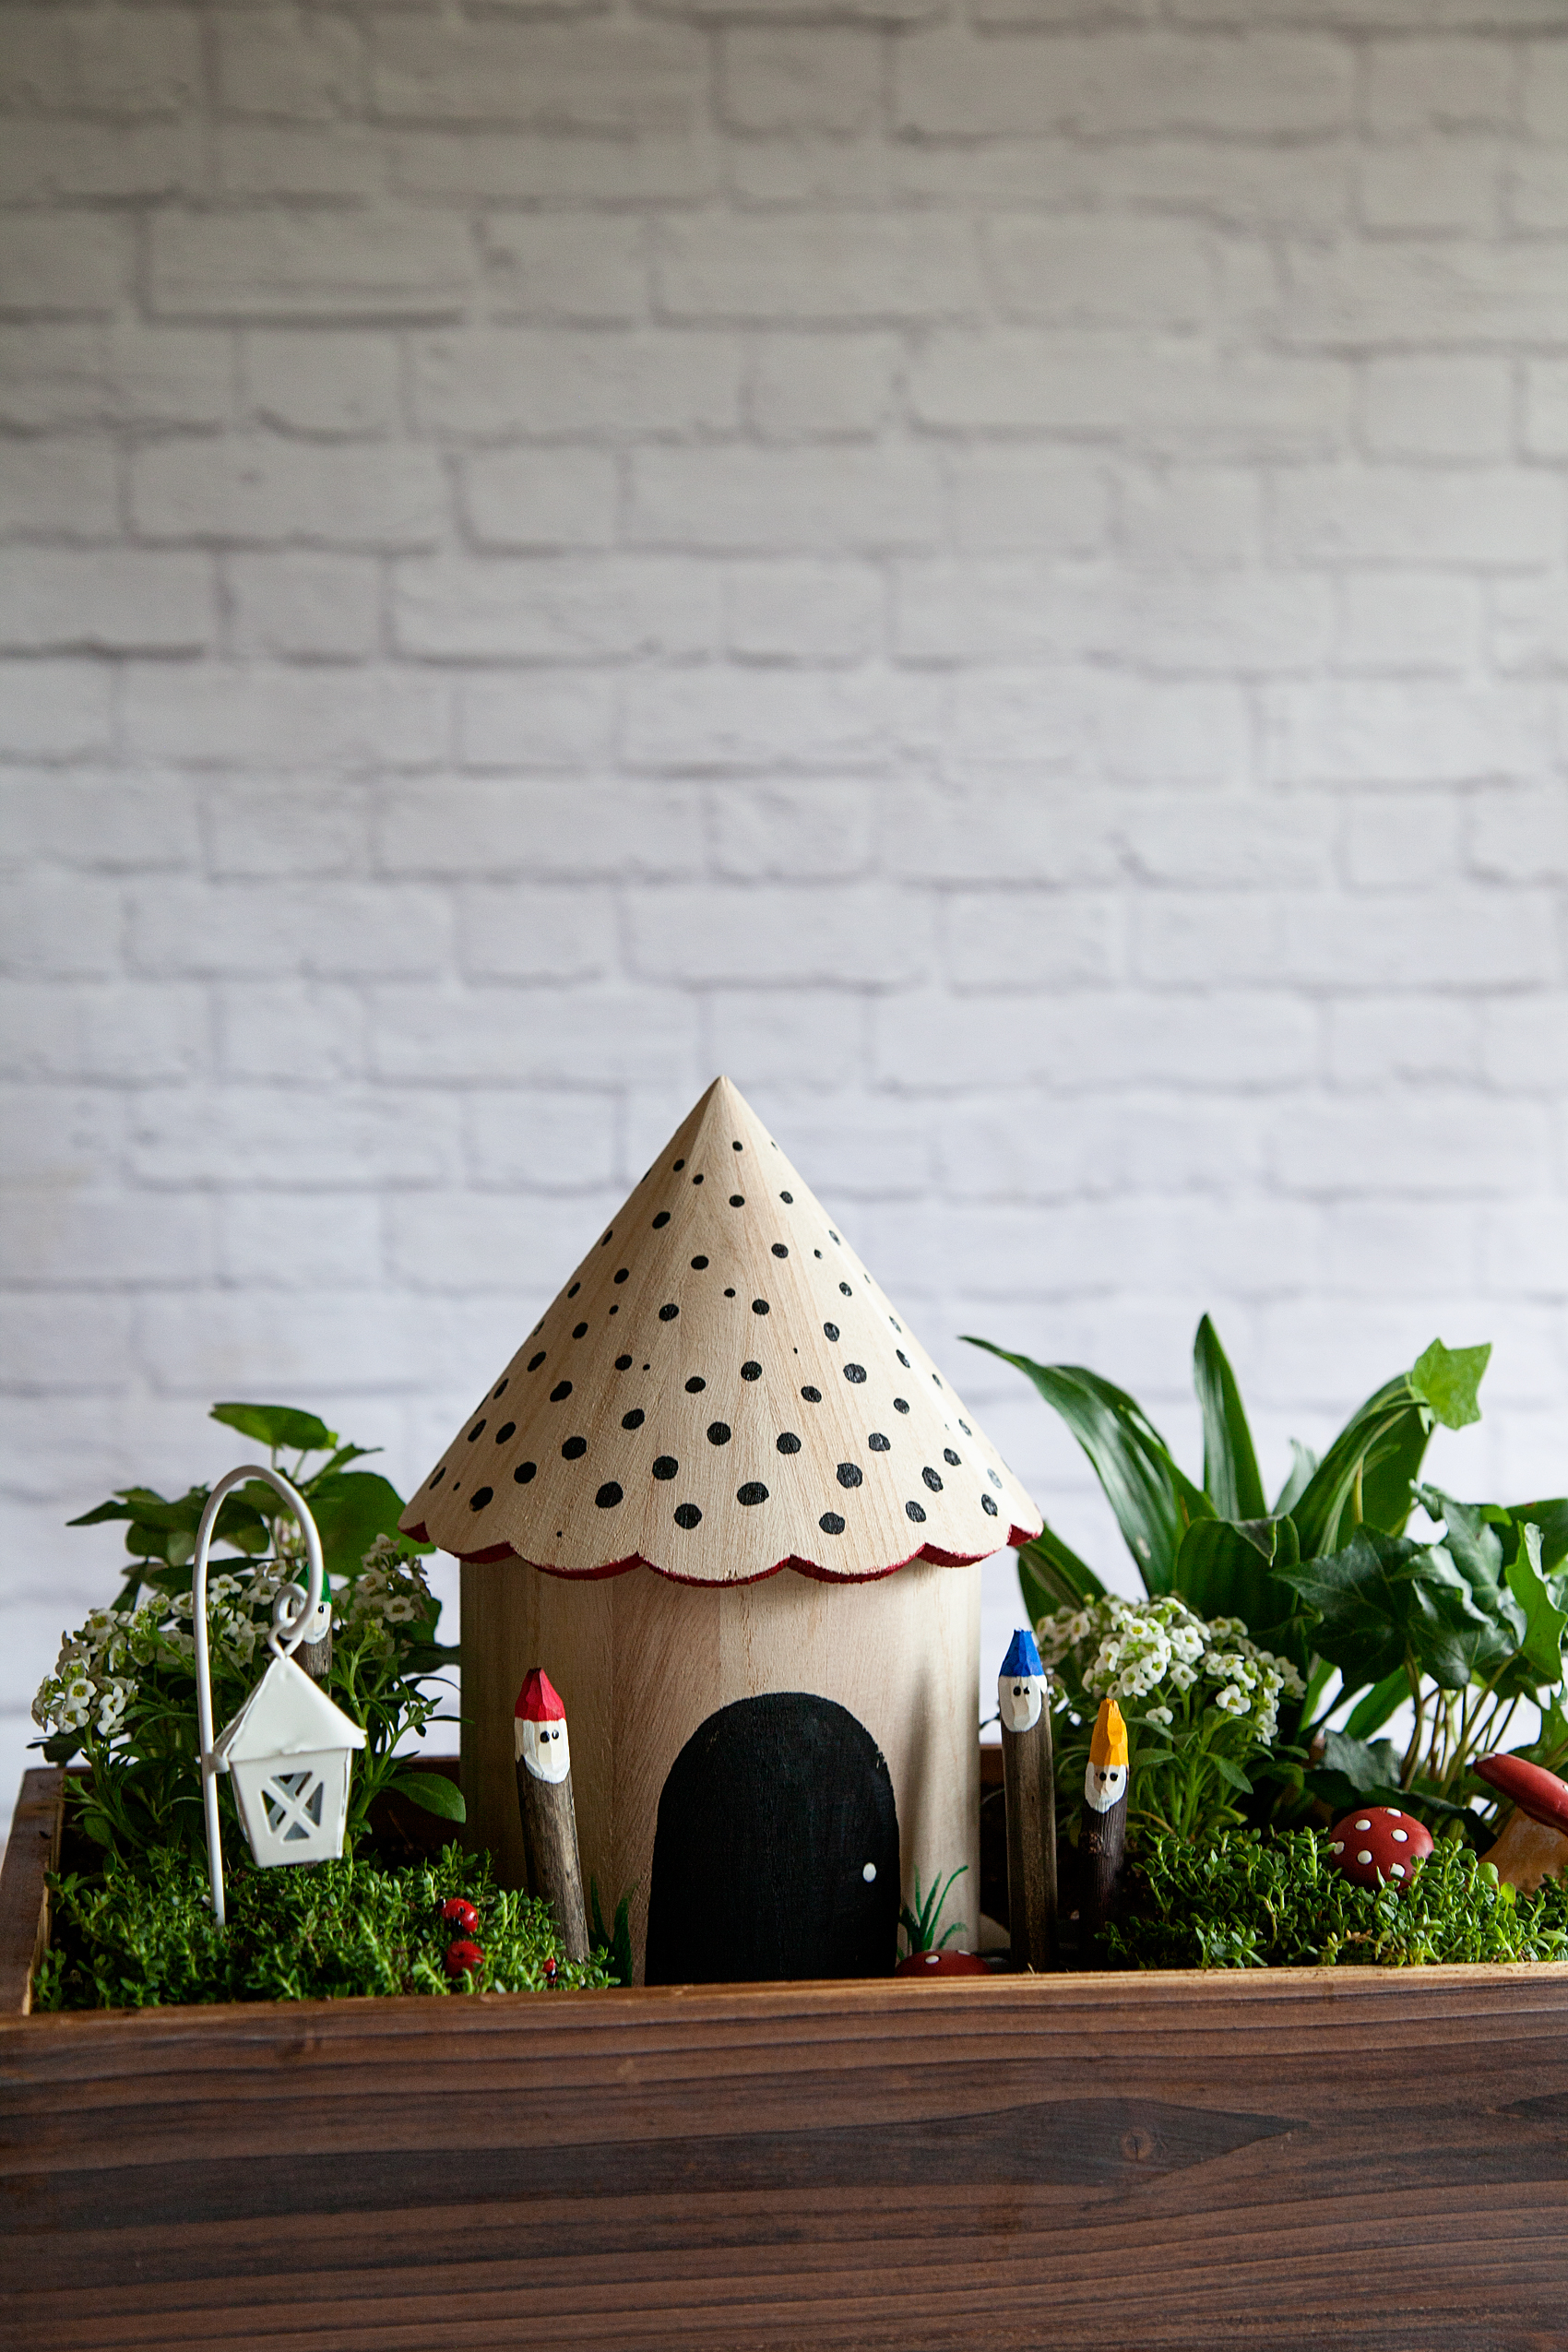 Gnome Gardens are a fun trend that the whole family can participate in. Create your own Gnomes with some sticks and @decoart Patio Paint.